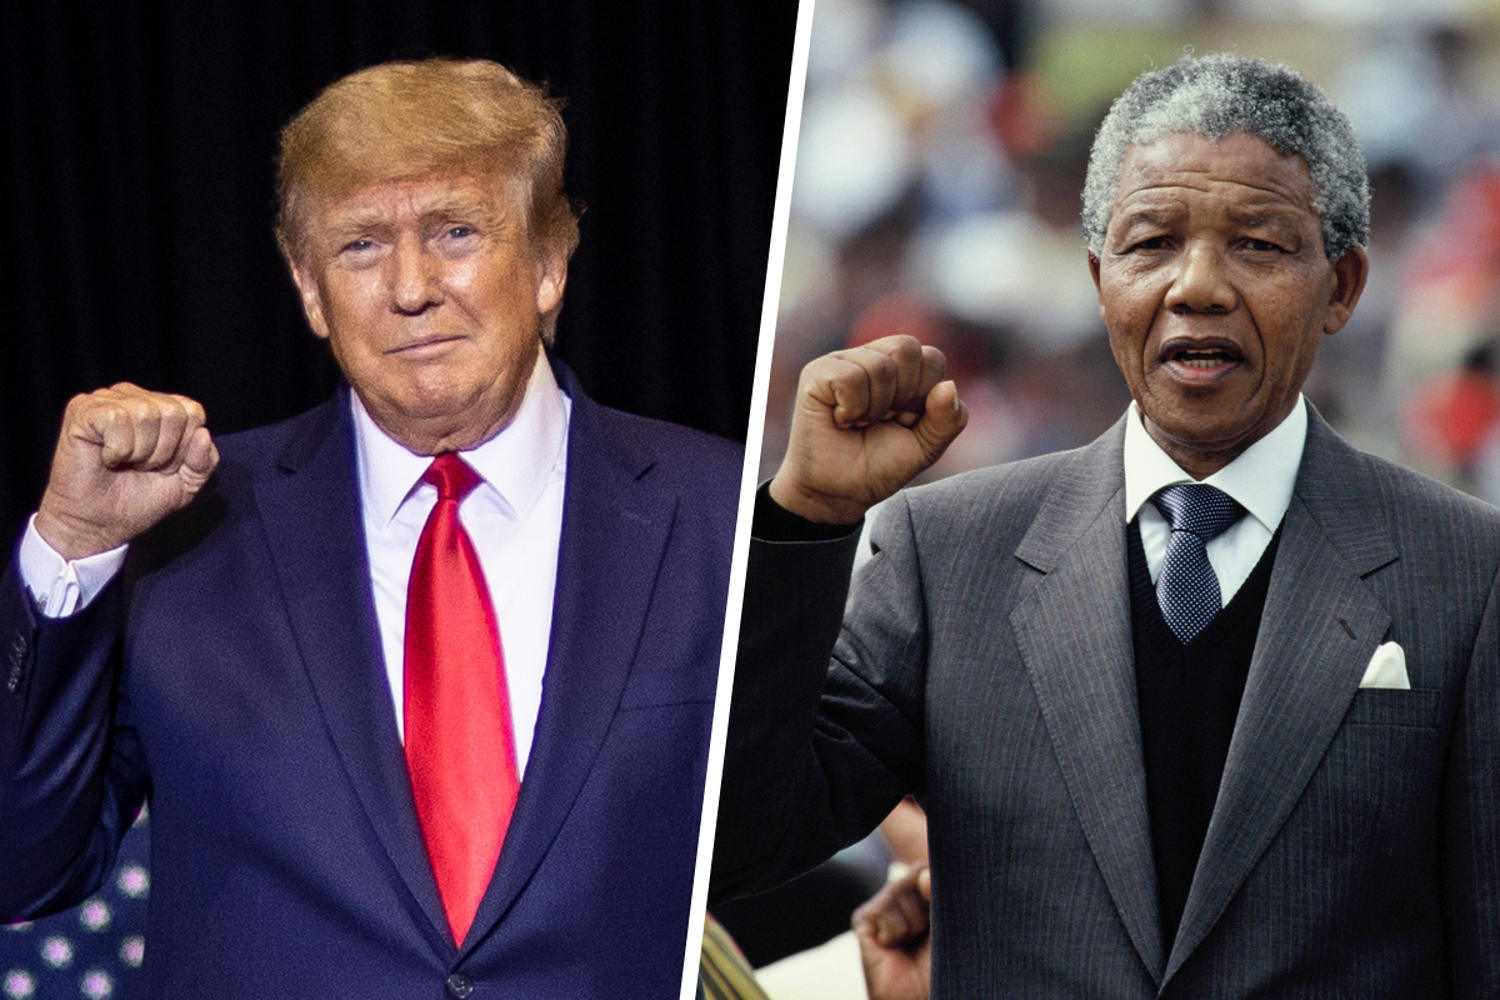 Why it matters that Trump keeps comparing himself to Nelson Mandela